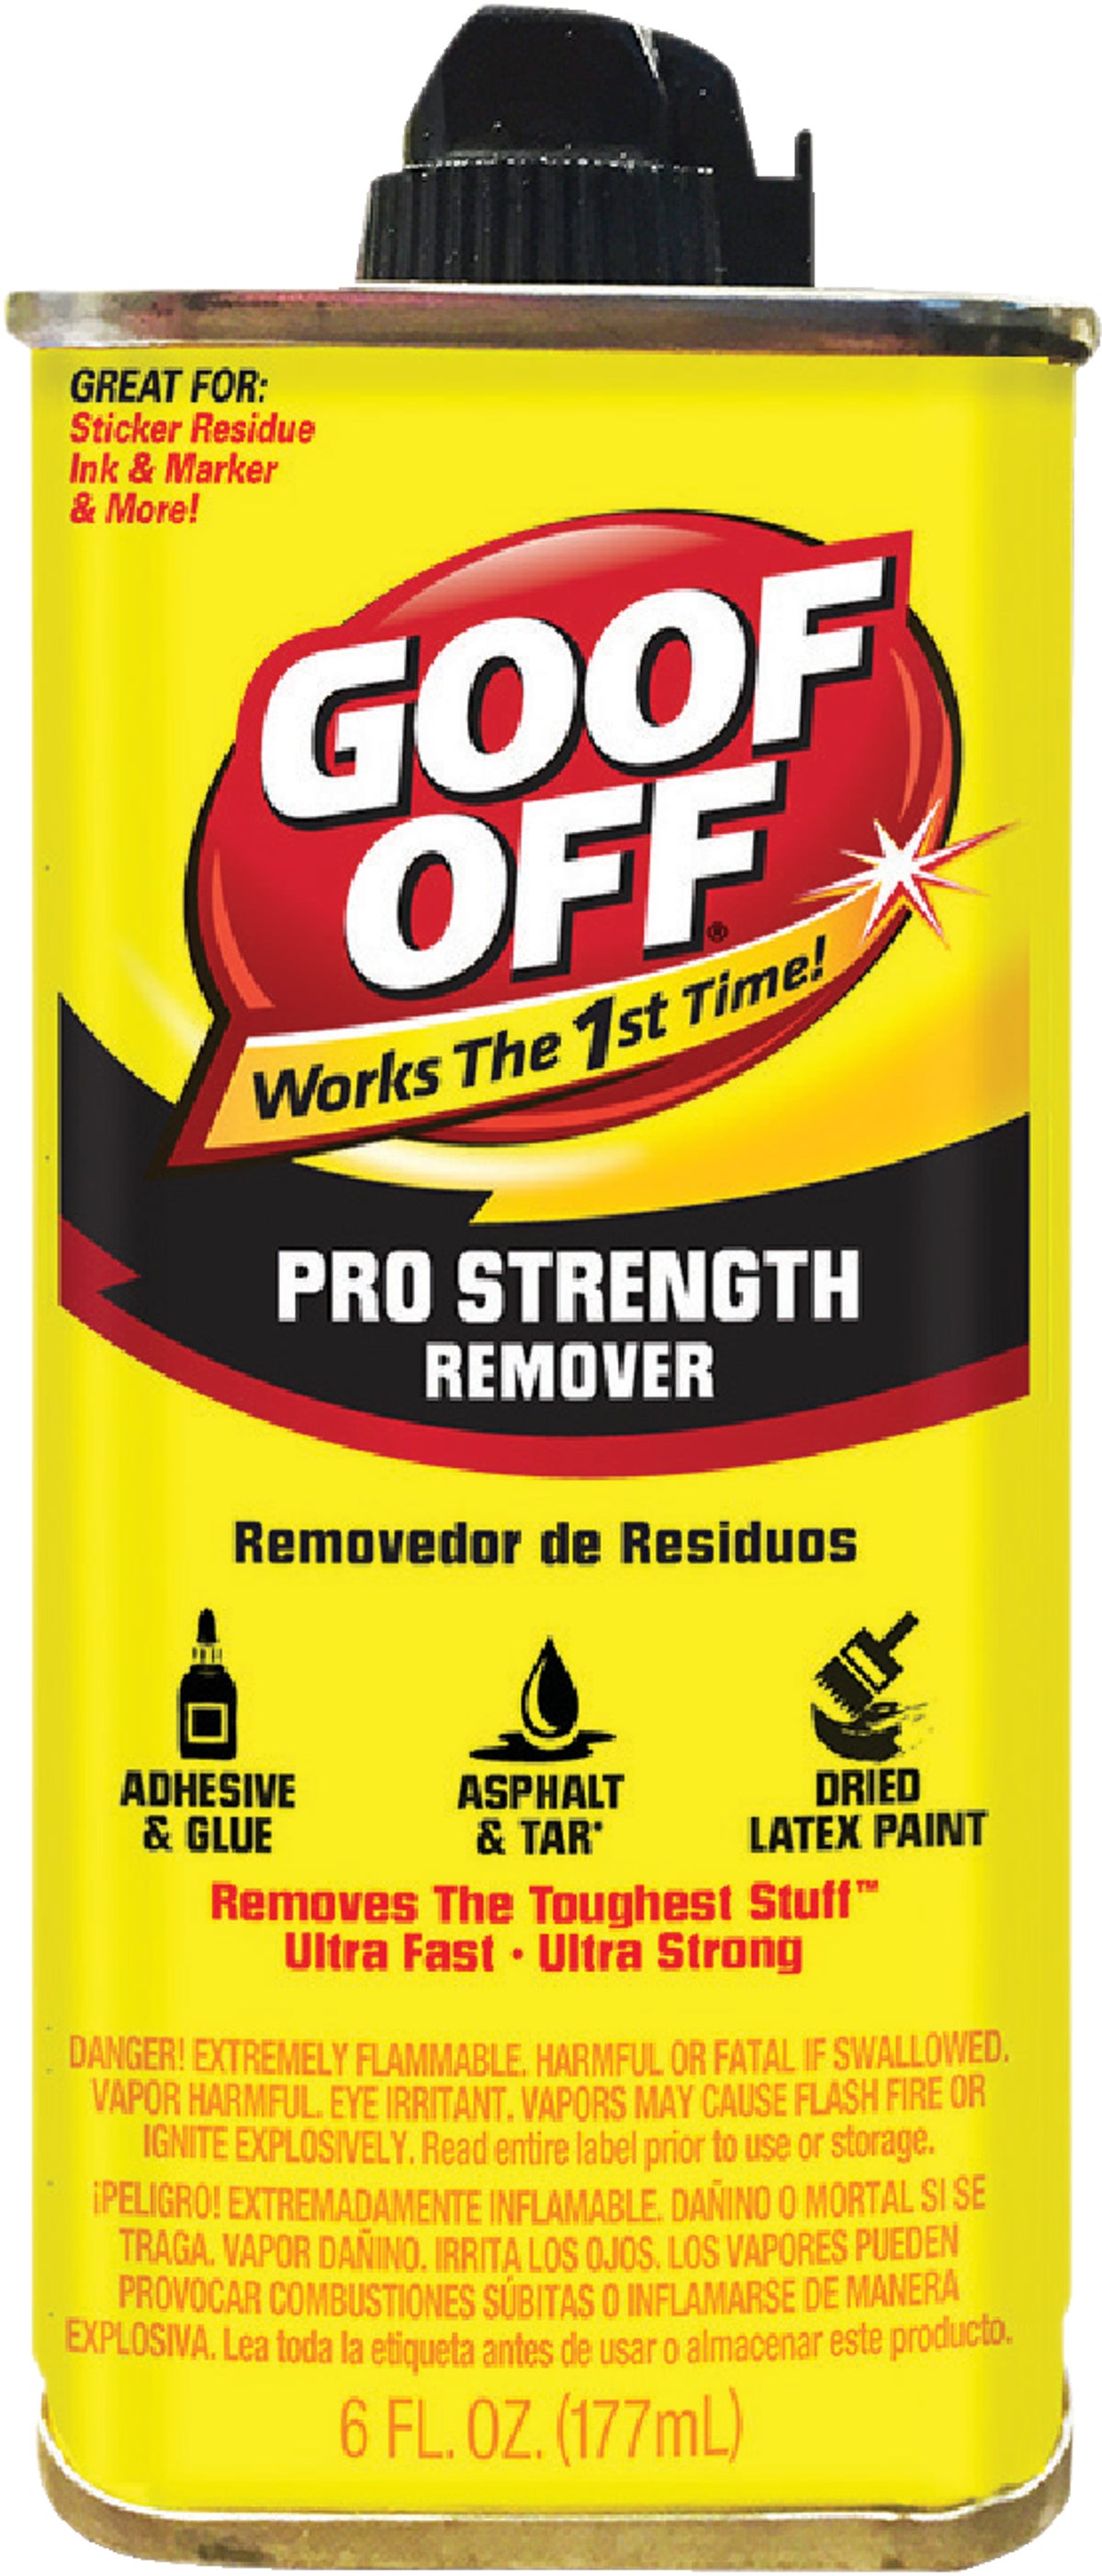 Qoo10 - GOO GONE Latex Paint Clean Up Paint Remover Spray/ Removes